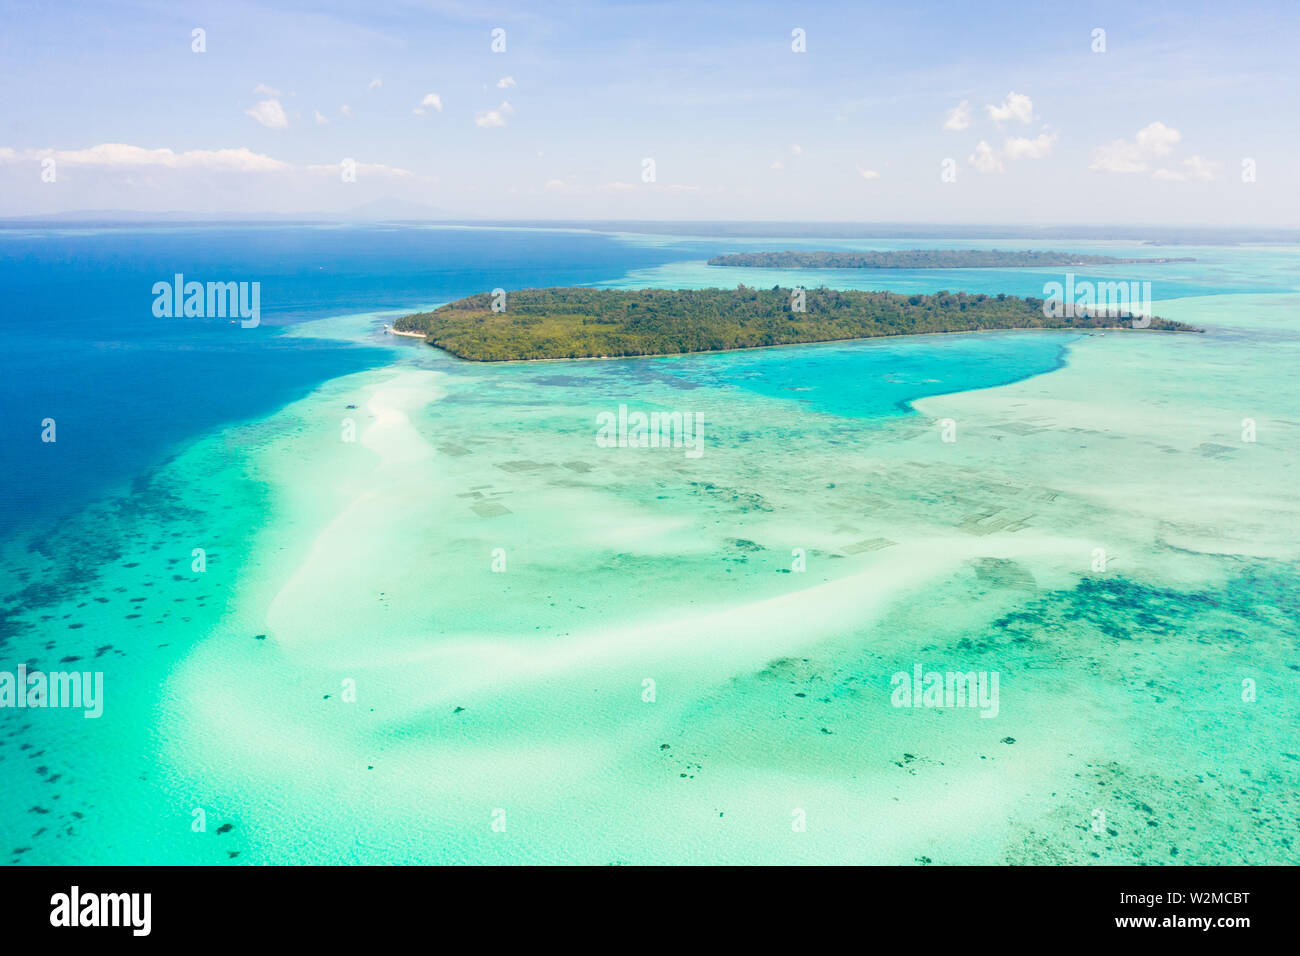 Mansalangan sandbar, Balabac, Palawan, Philippines. Tropical islands with turquoise lagoons, view from above. Seascape with atolls and islands. Stock Photo